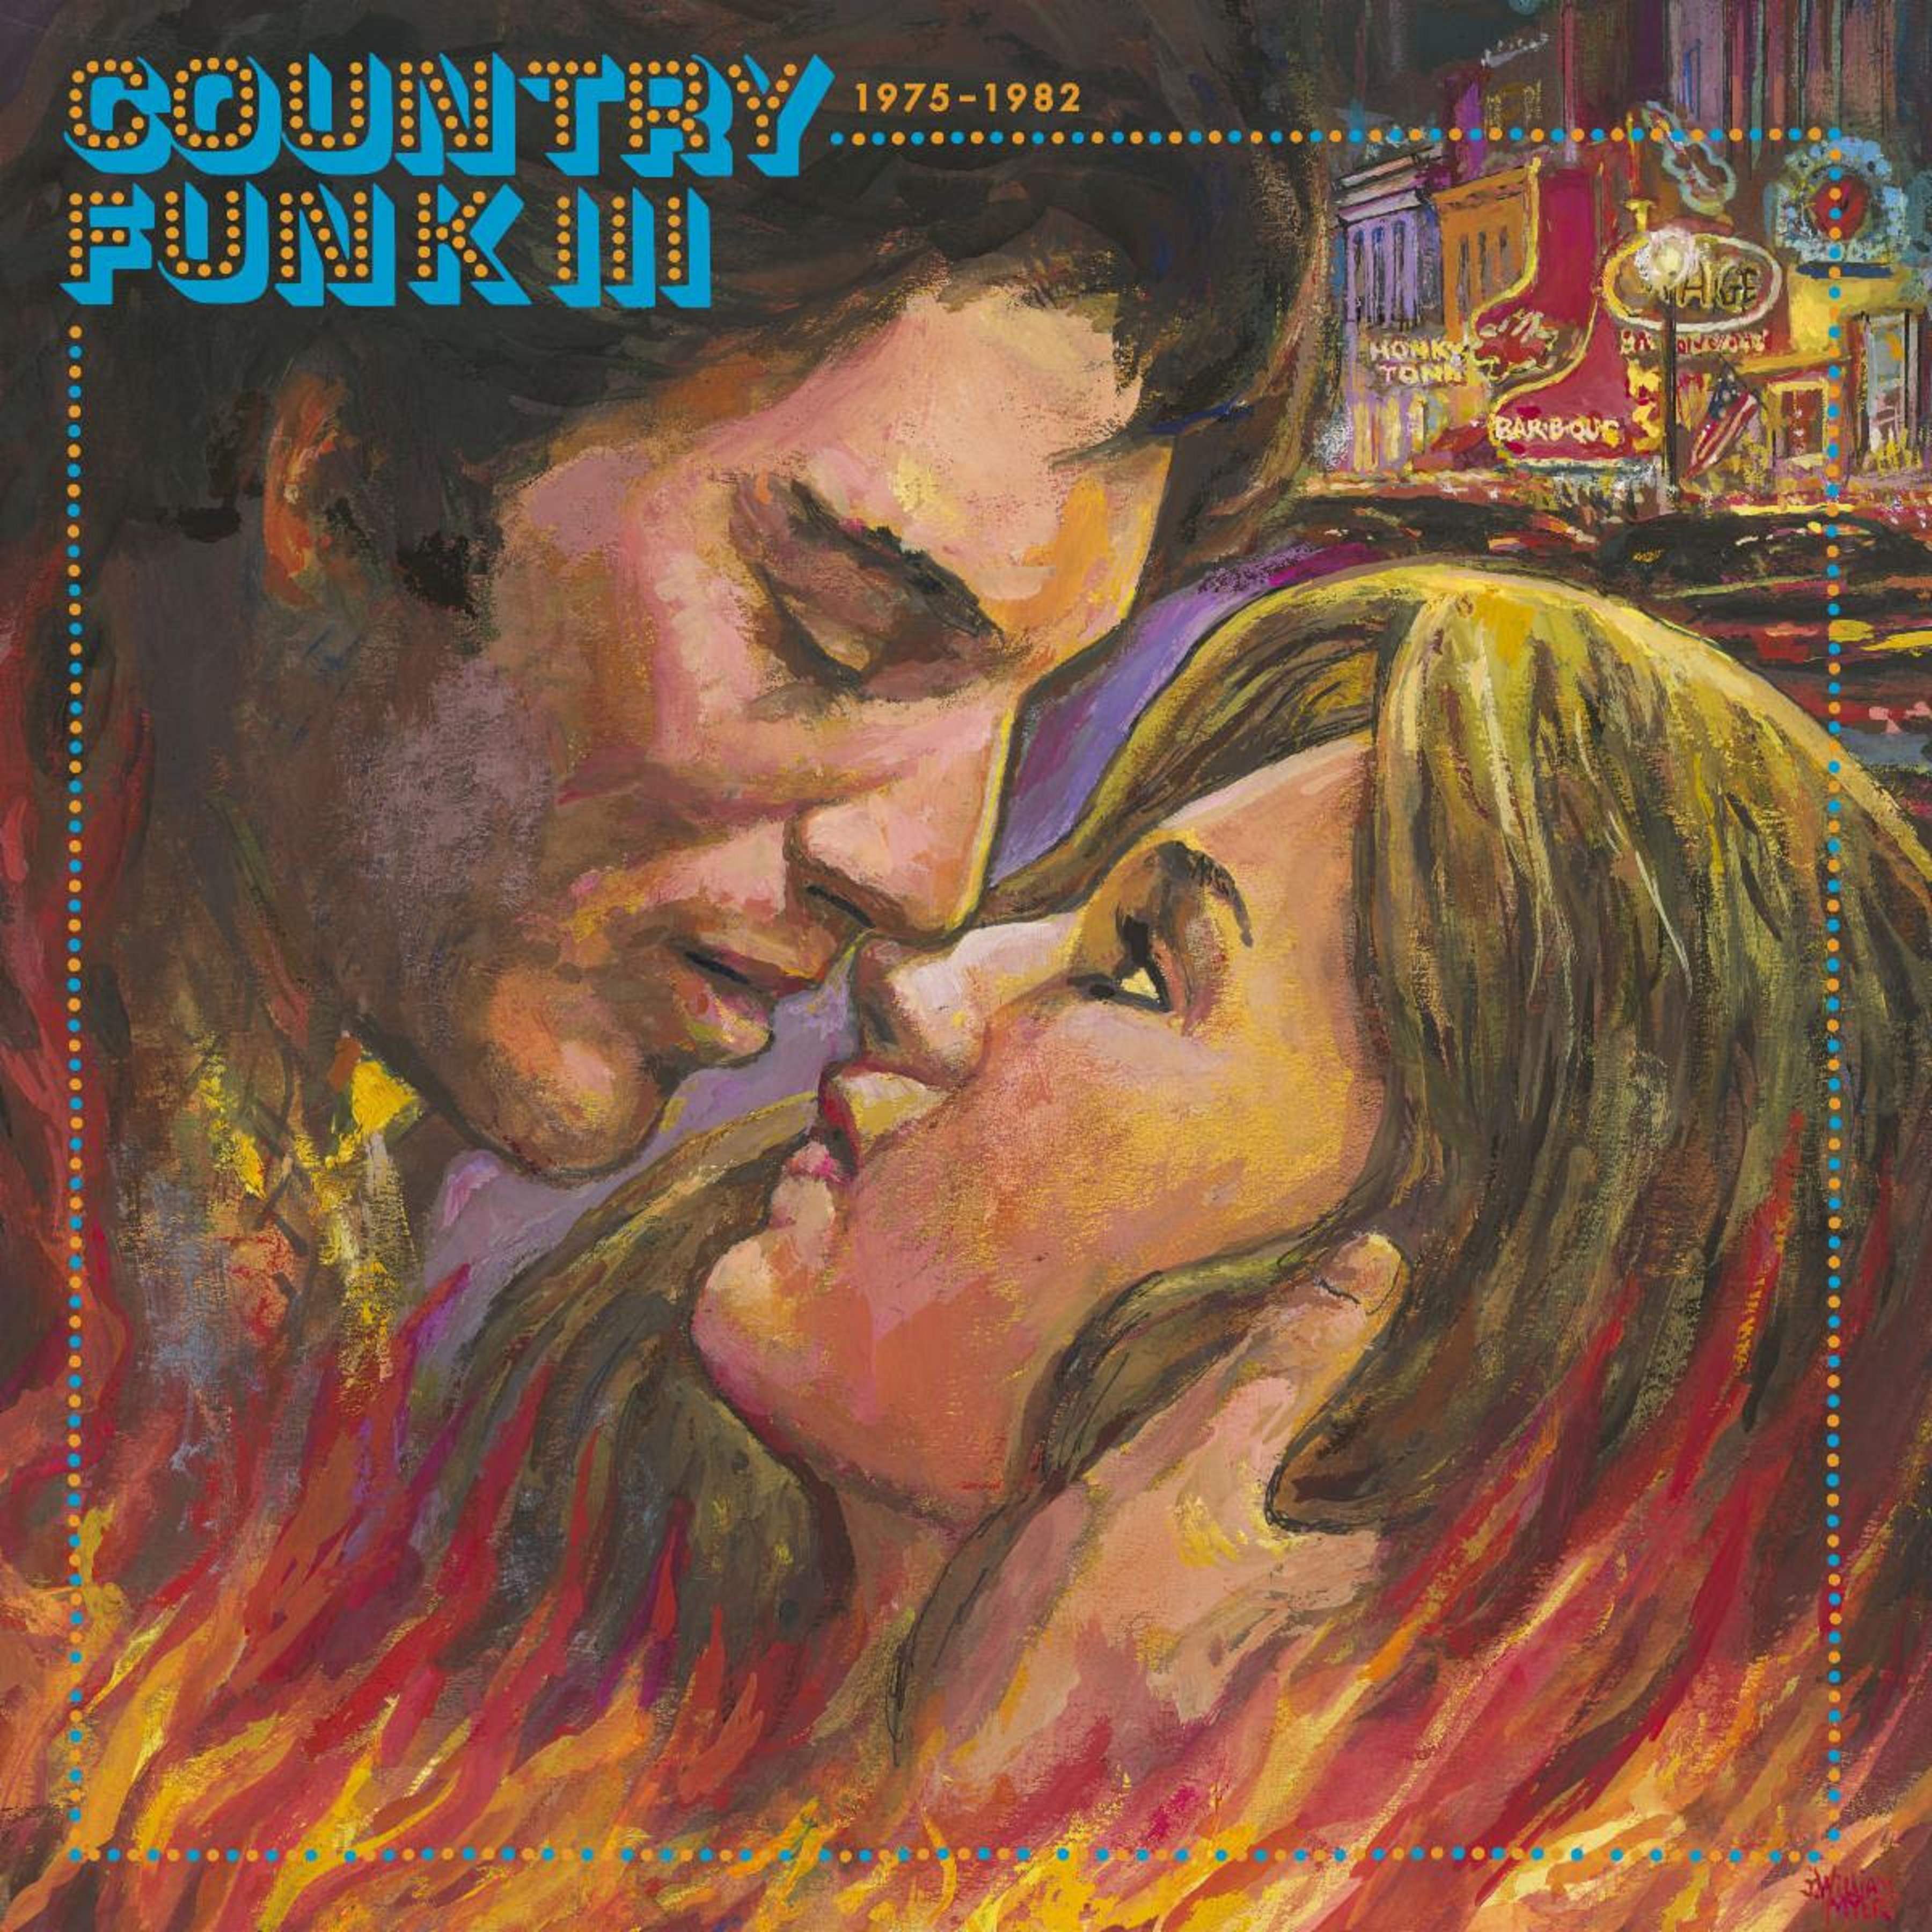 Light in the Attic announces 'Country Funk Volume III (1975-1982)'